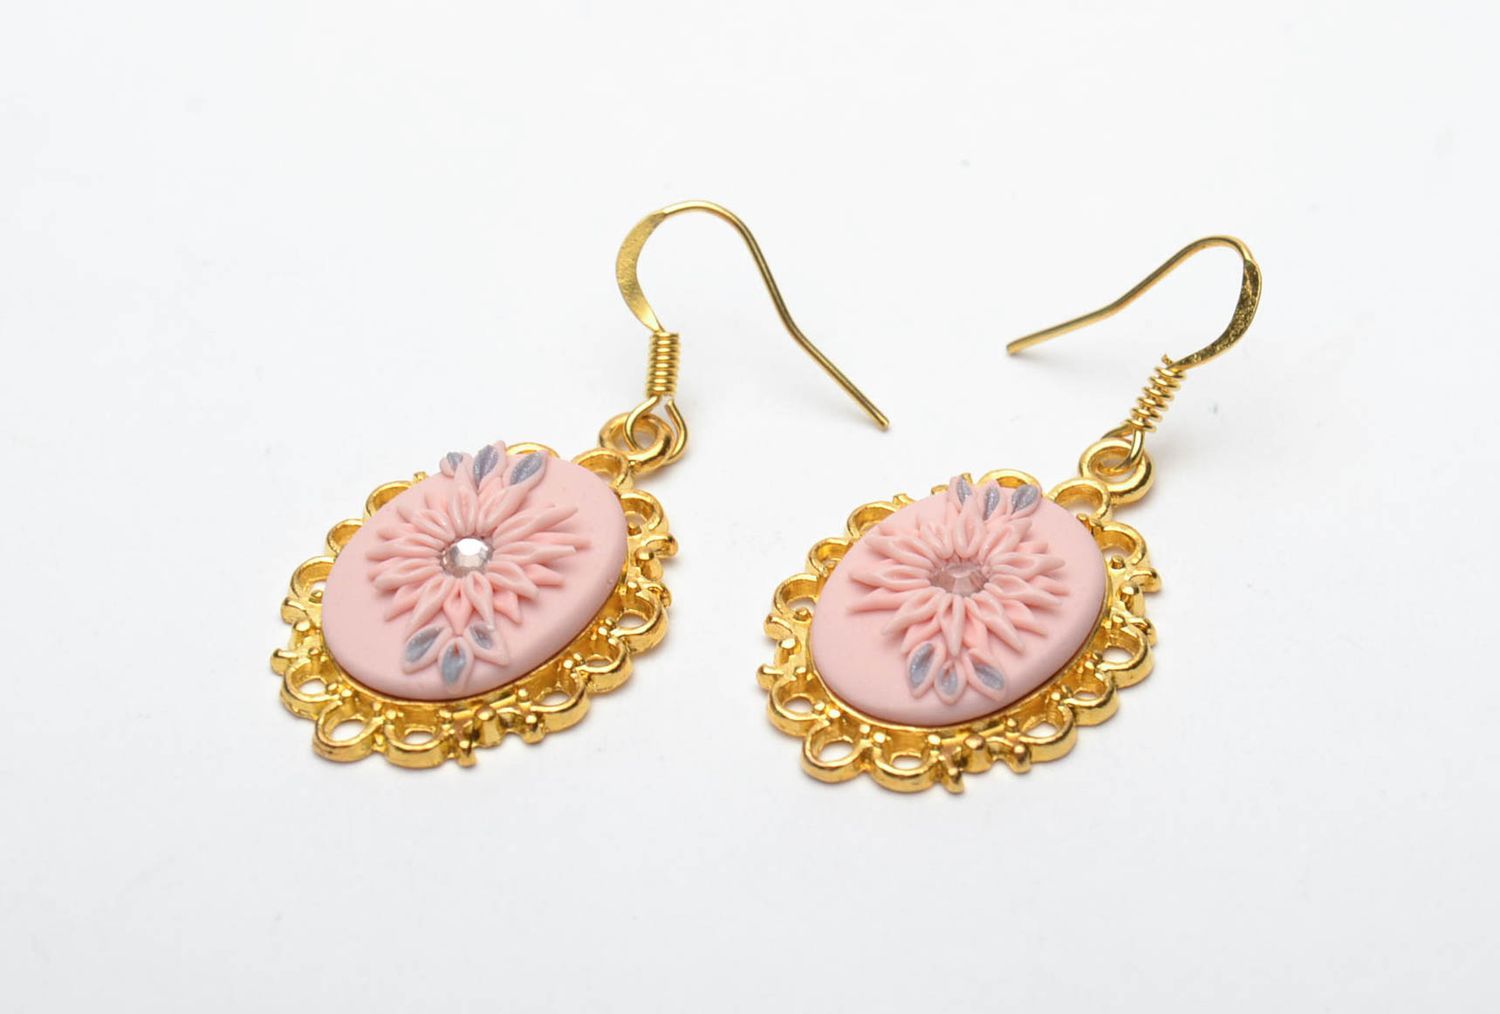 Polymer clay earrings made using filigree technique photo 2